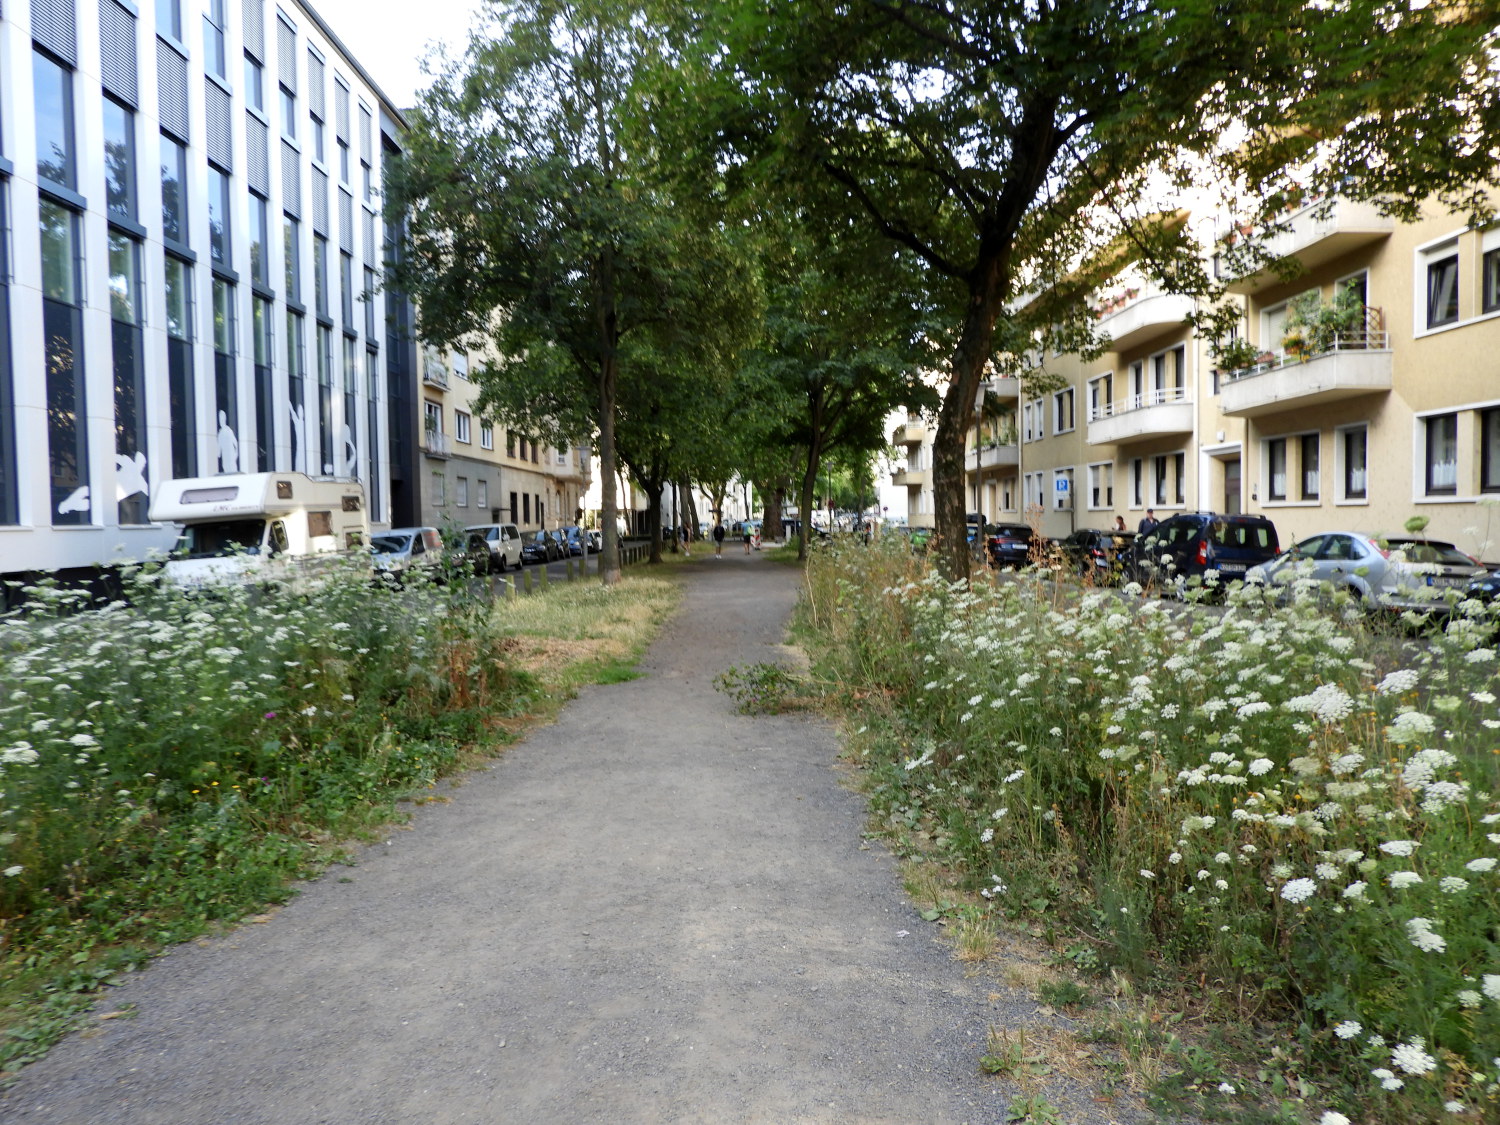 Green avenue through the streets of Koblenz